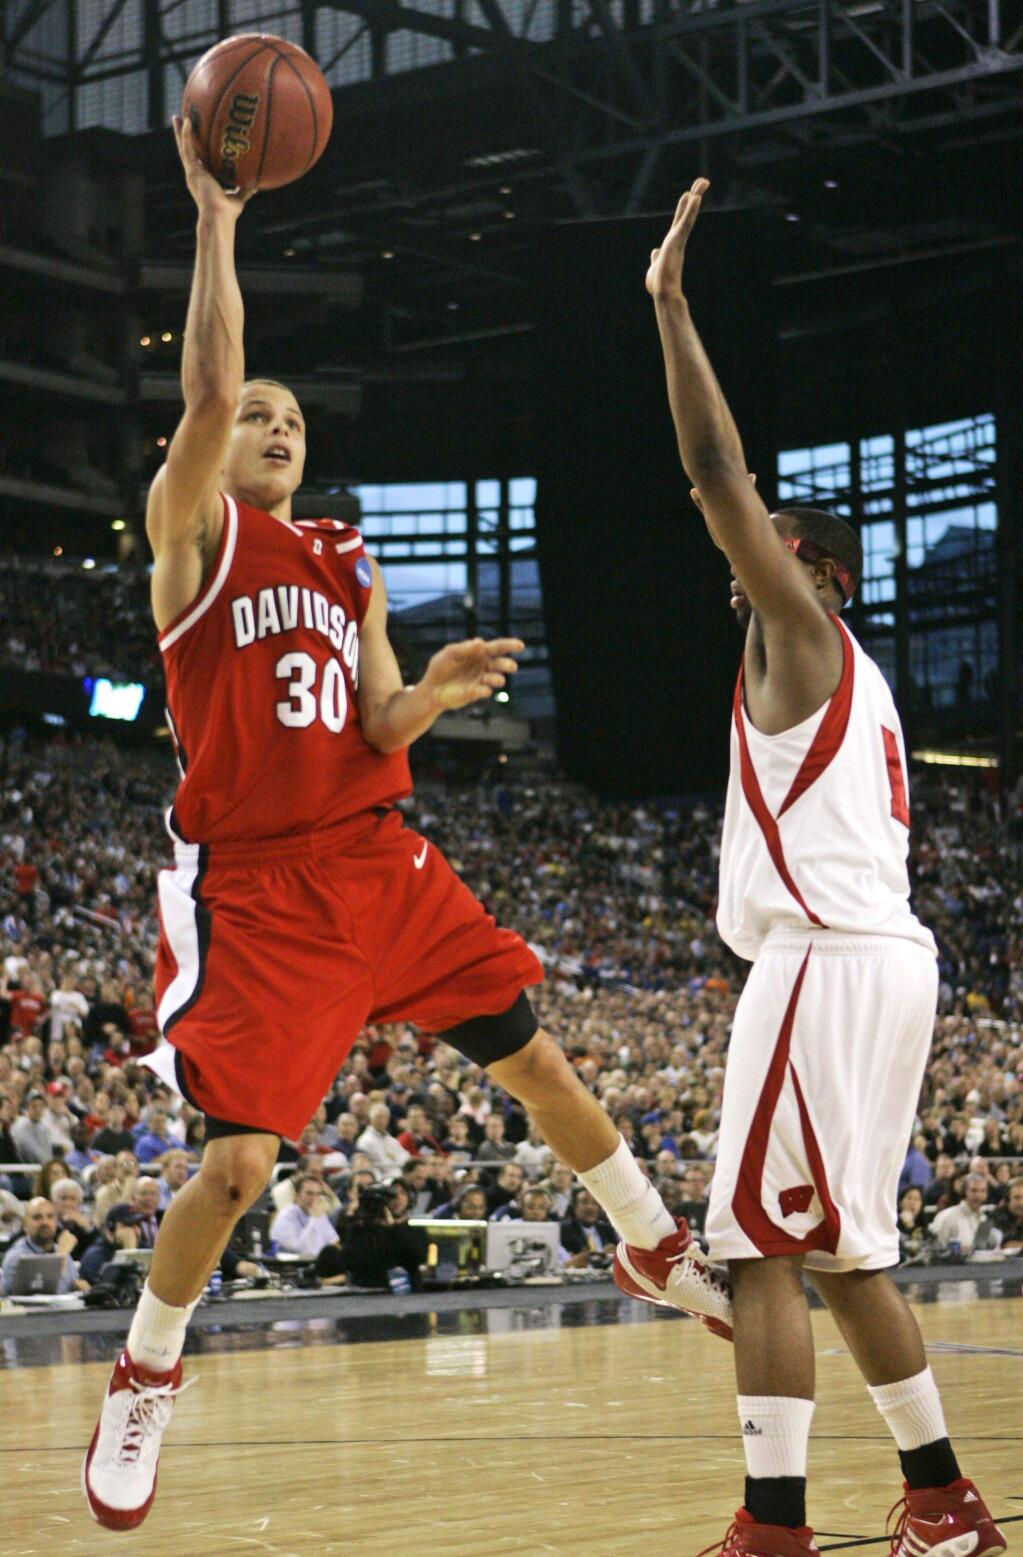 Davidson's Stephen Curry (30) shoots over Wisconsin's Marcus Landry during the first half of an NCAA Midwest Regional semifinal basketball game Friday, March 28, 2008, in Detroit. (AP Photo/Carlos Osorio)